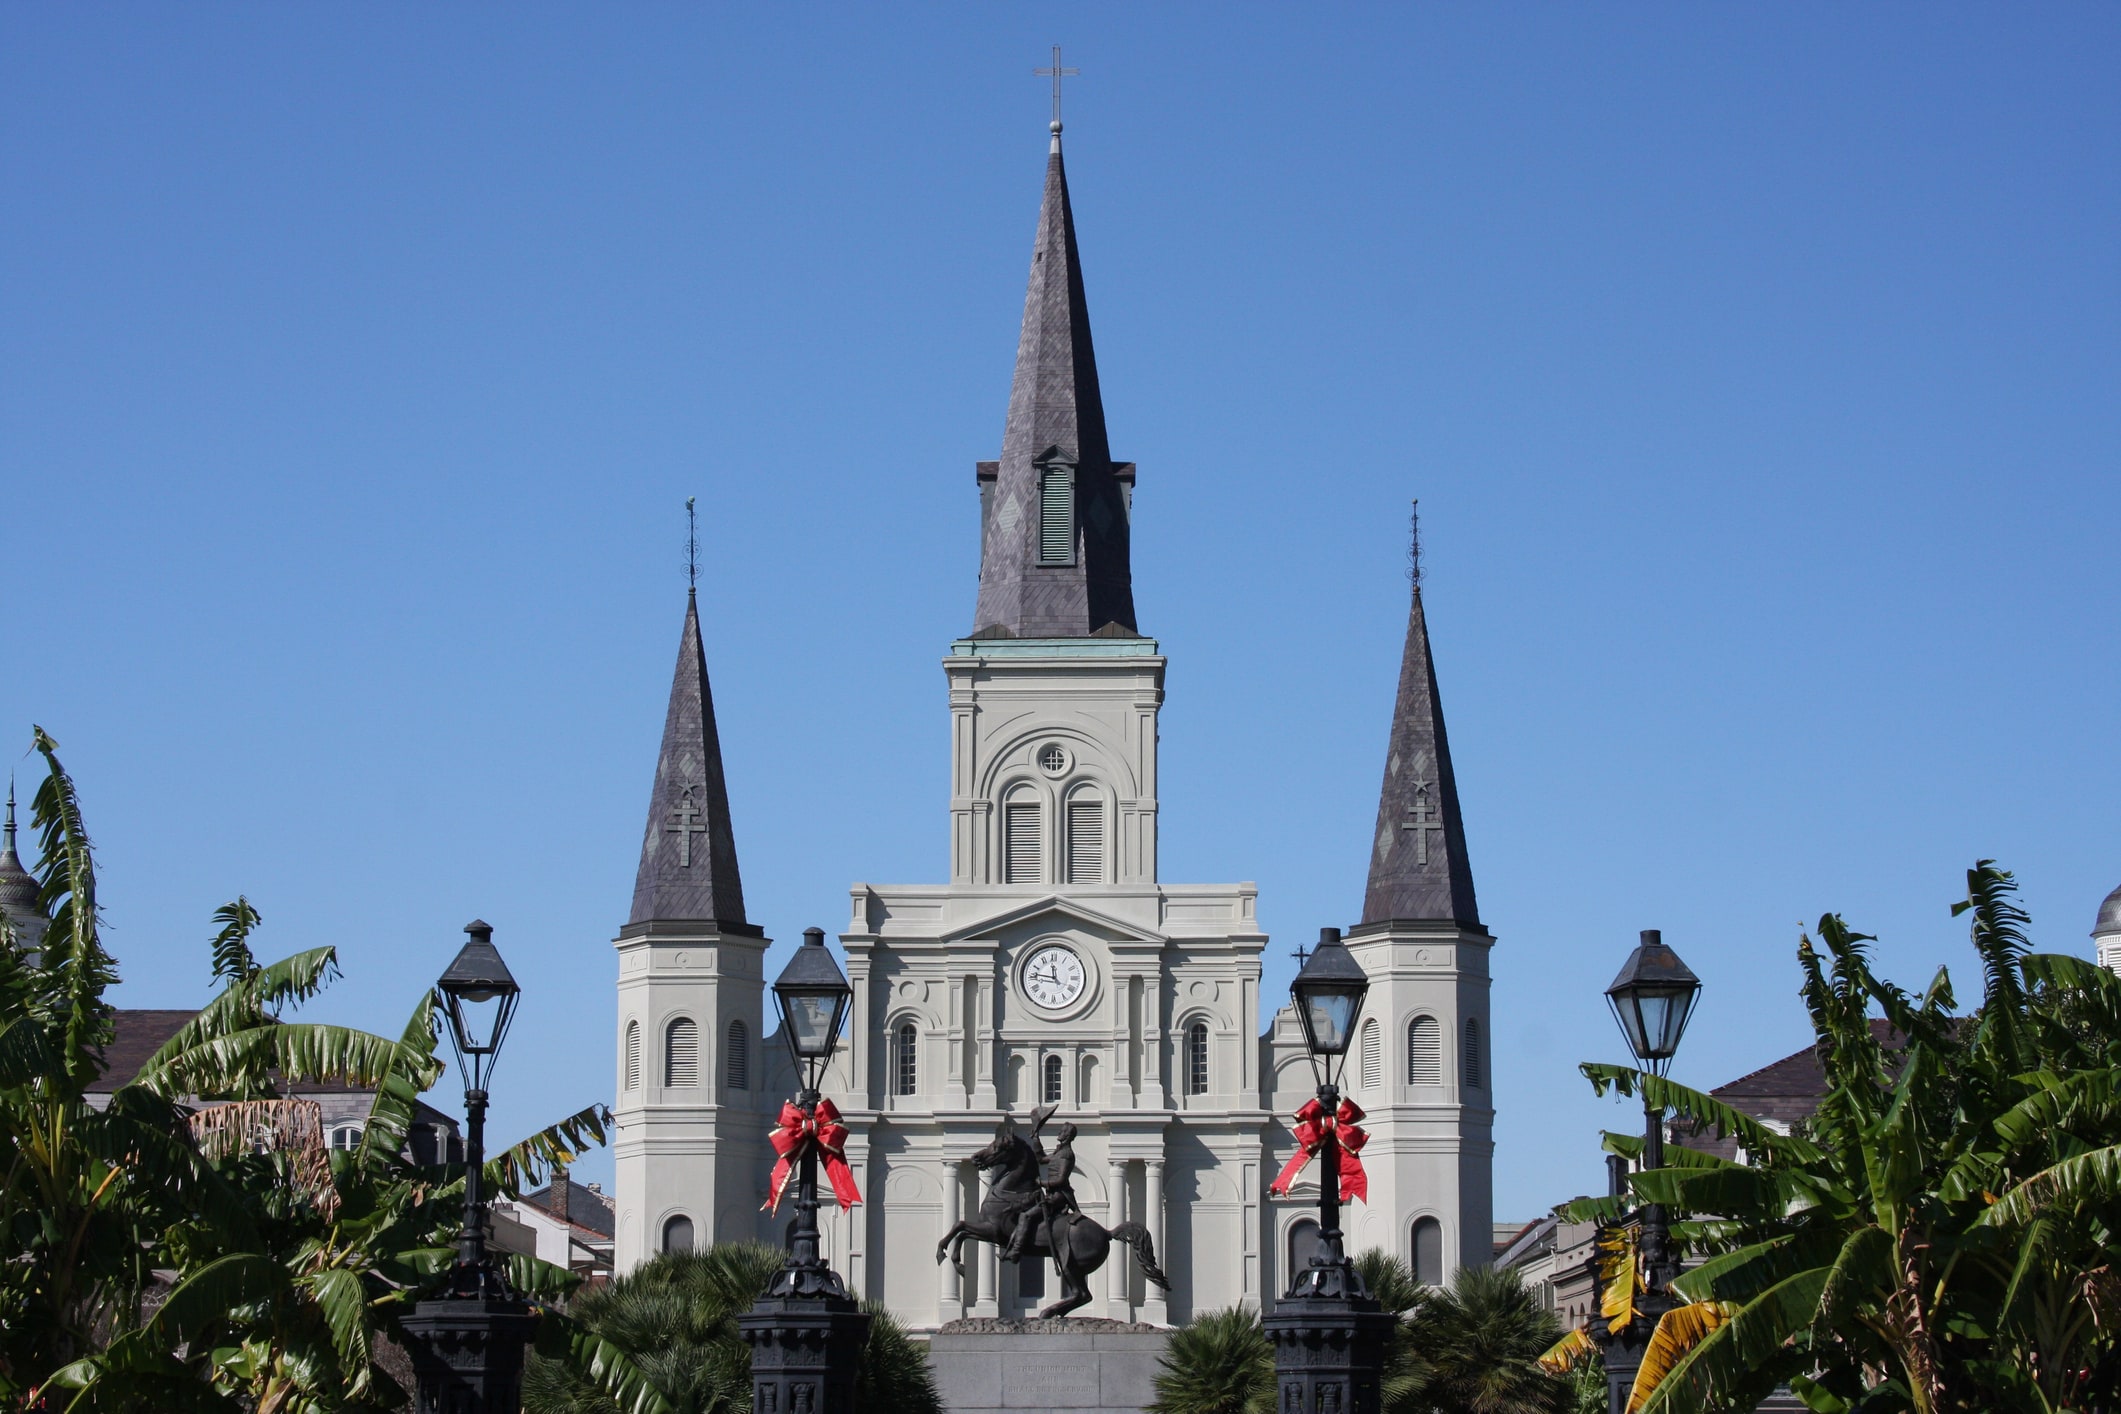 Christmas bows decorate lampposts at the St. Louis Cathedral in New Orleans, LA.